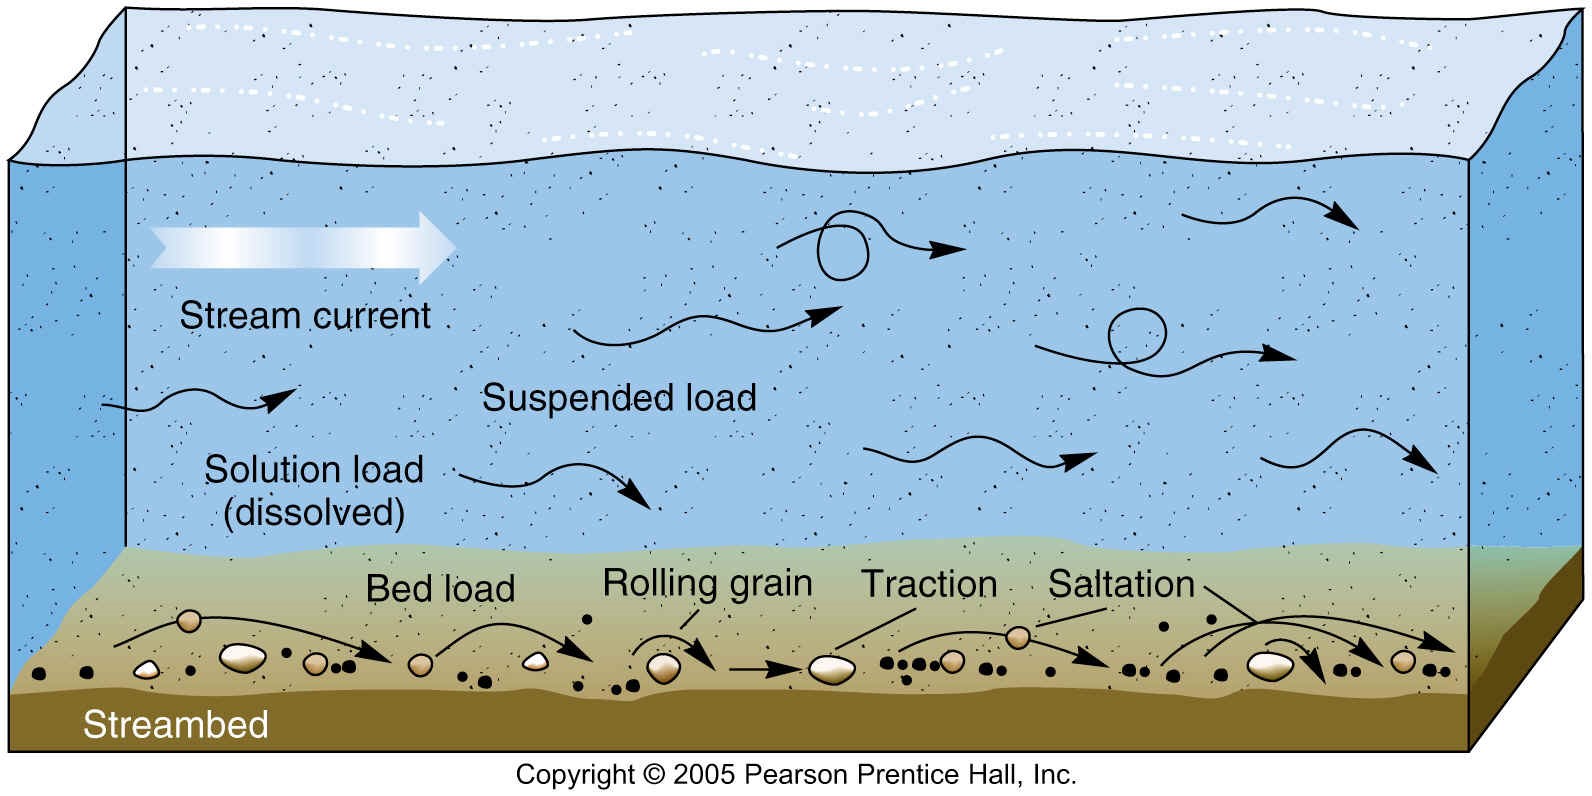 Load reference. Suspended load in River. Trap suspended Sediments. Oil biodegradation in surface Waters and Sediments.